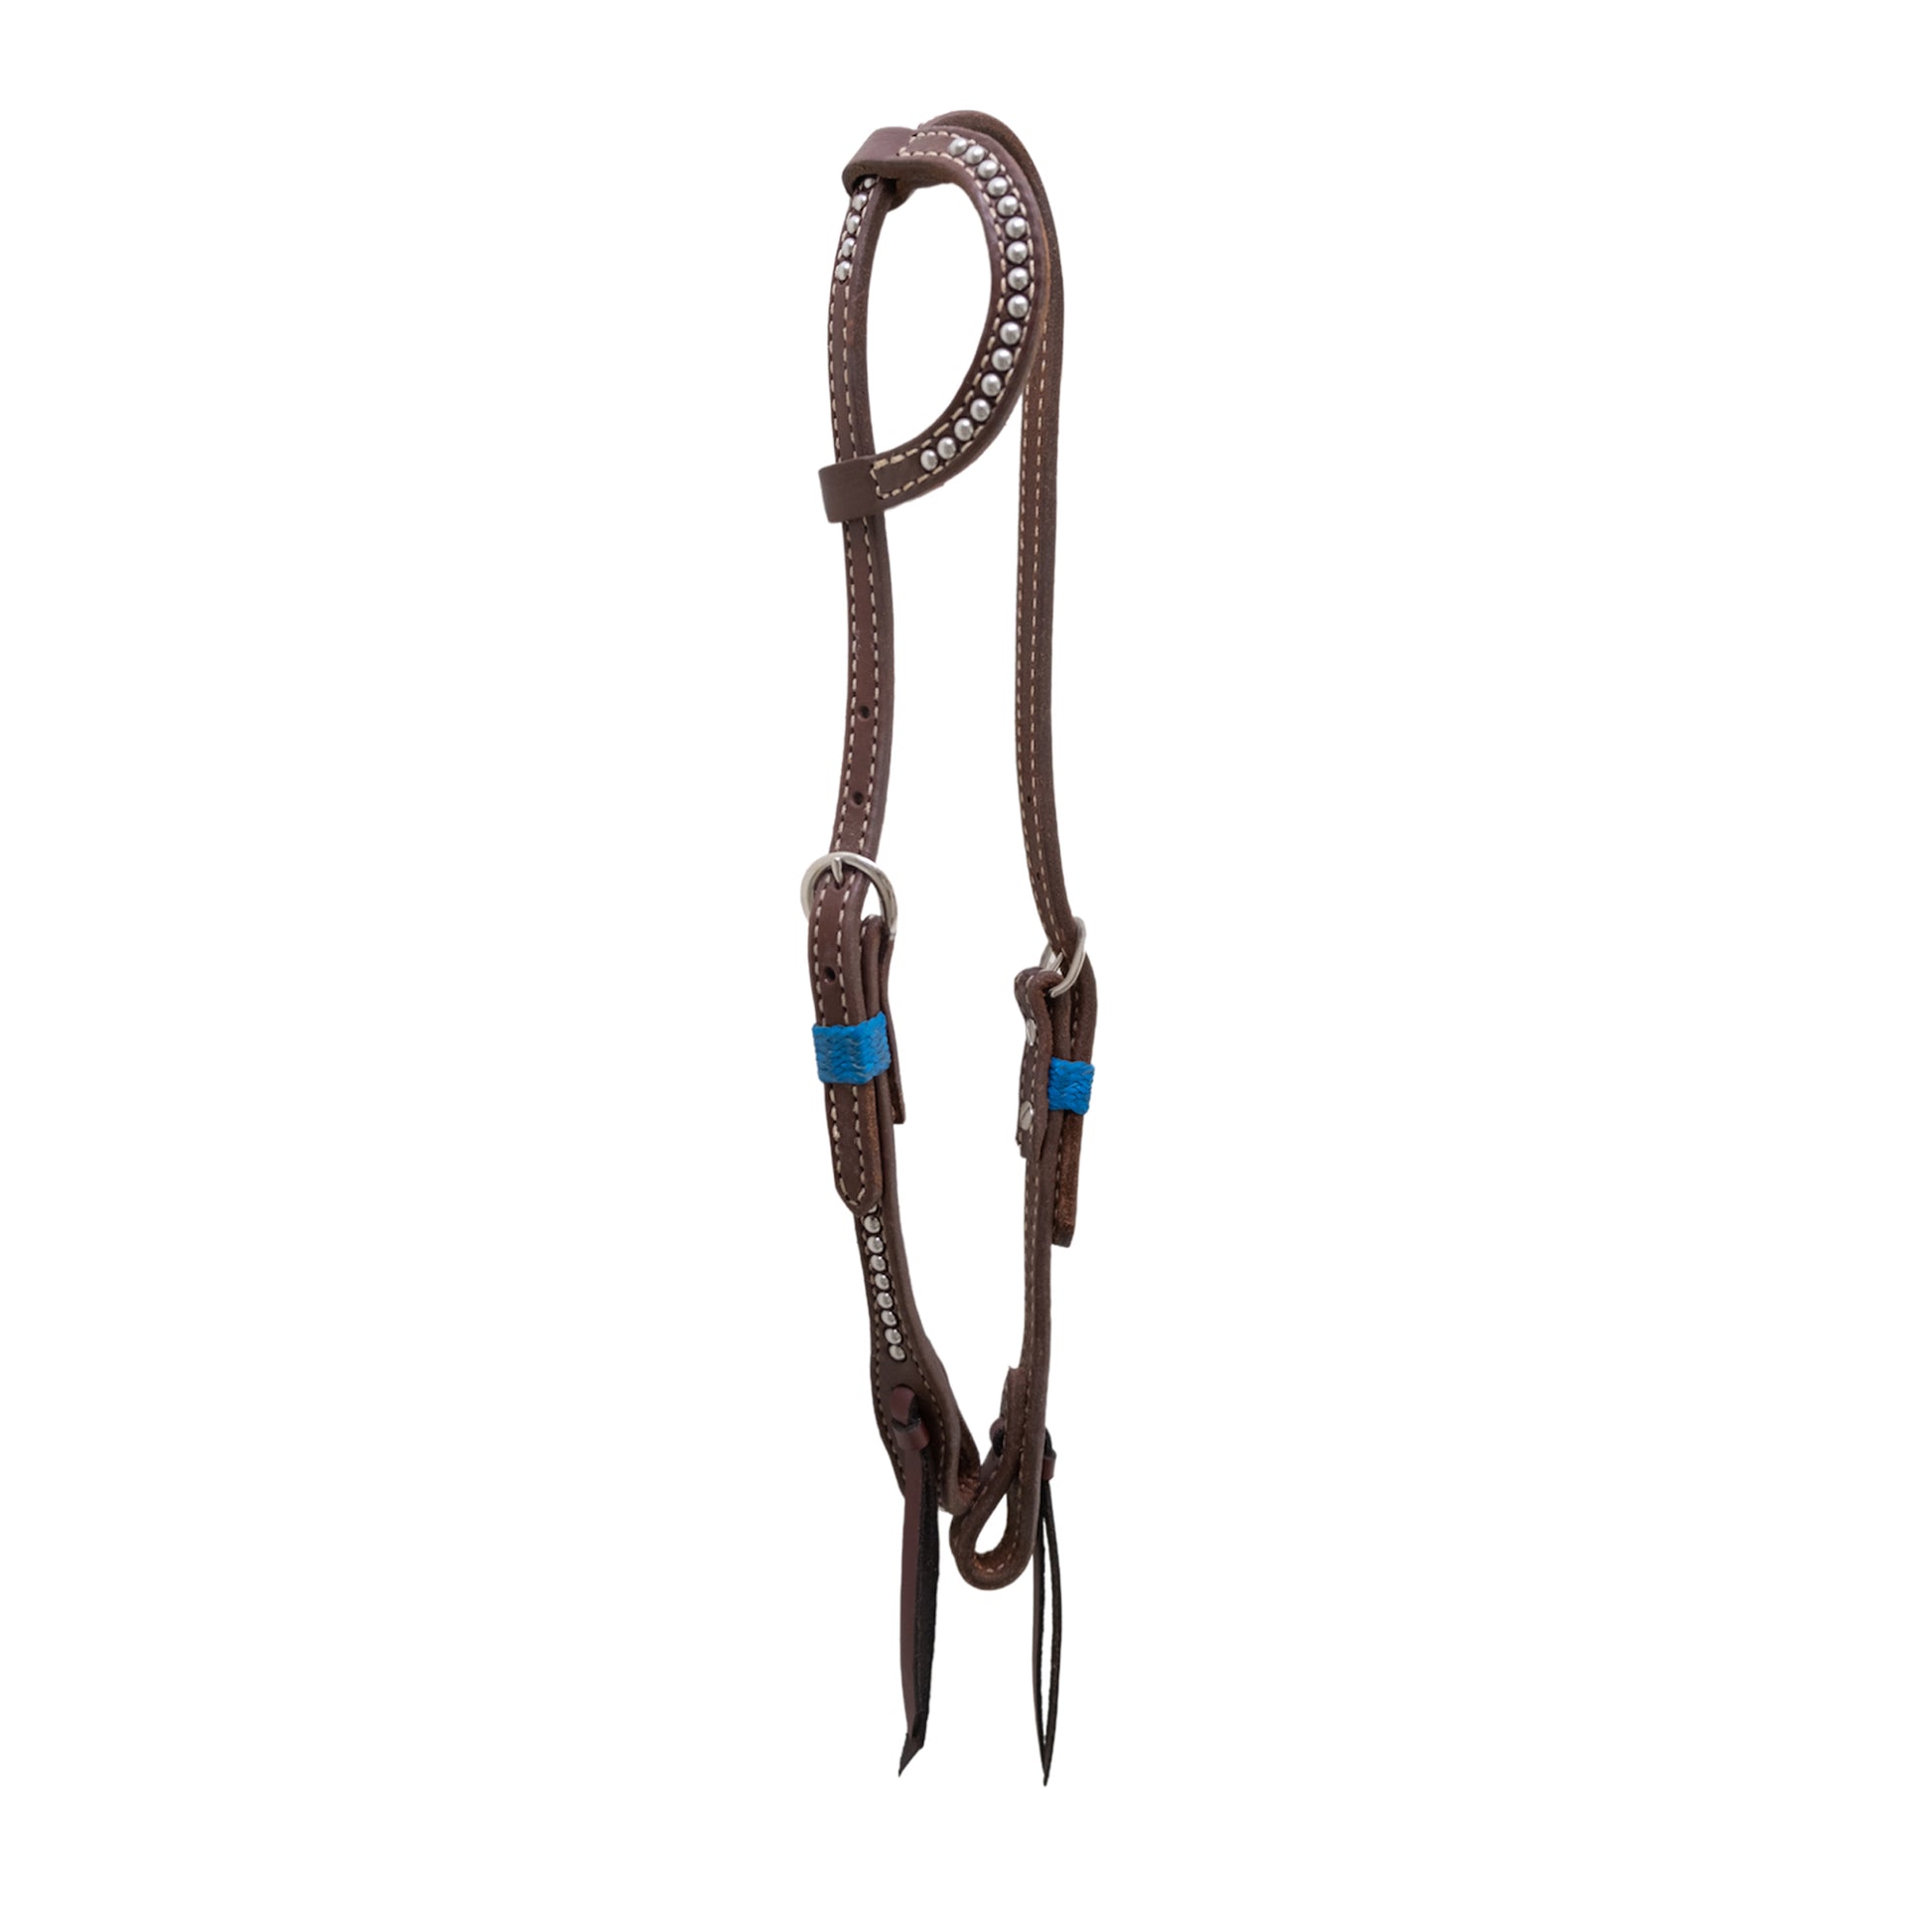 5/8" Flat one ear headstall heavy oiled harness leather with teal loops and spots. 